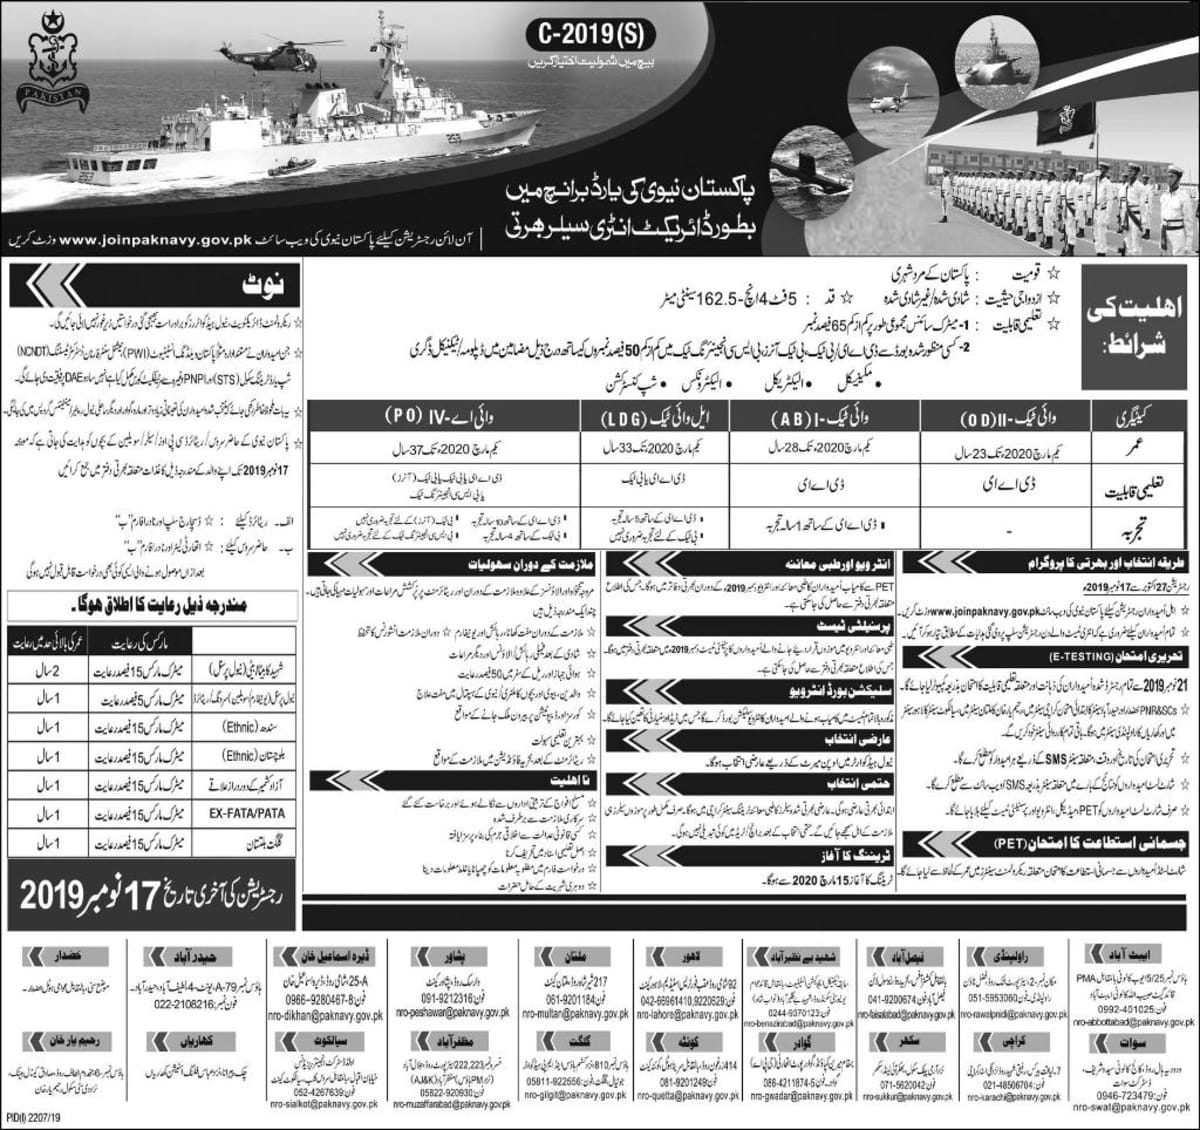 Join Pakistan Navy Jobs 2019 As Sailor Direct Entry Yard Branch C-2019(S) Latest Advertisement Online Registration